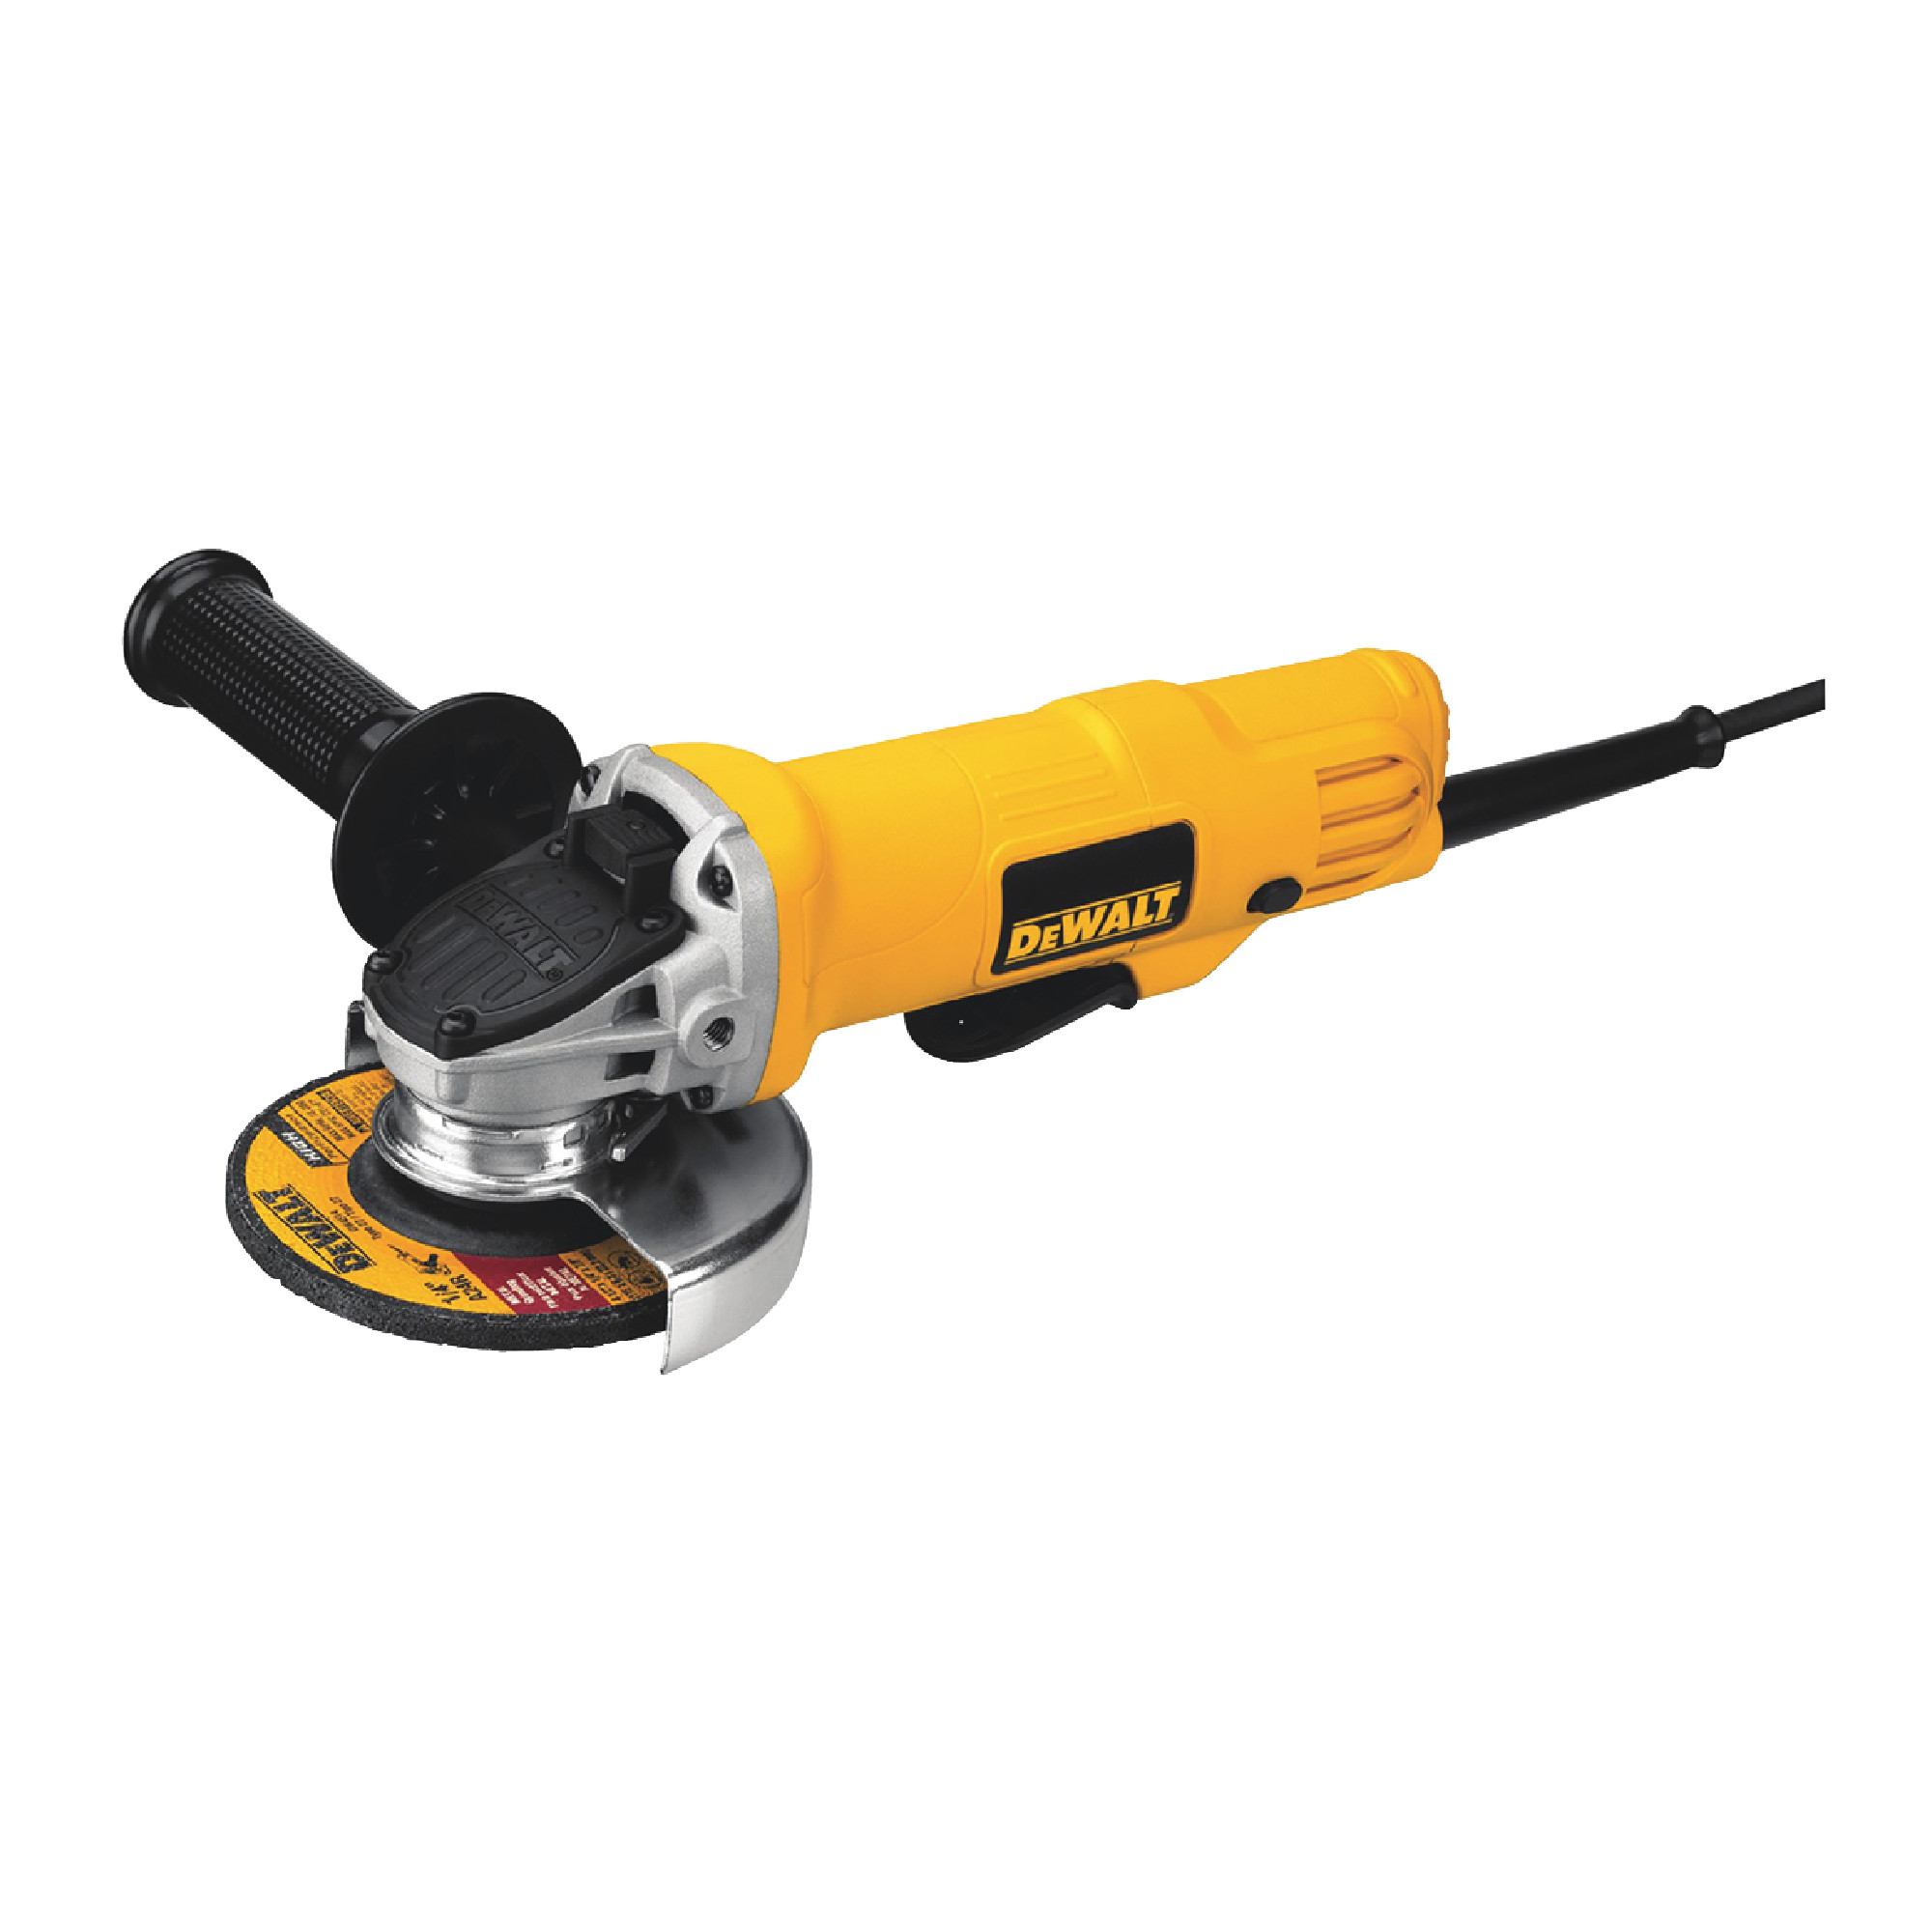 4-1/2" Paddle Switch Small Angle Grinder